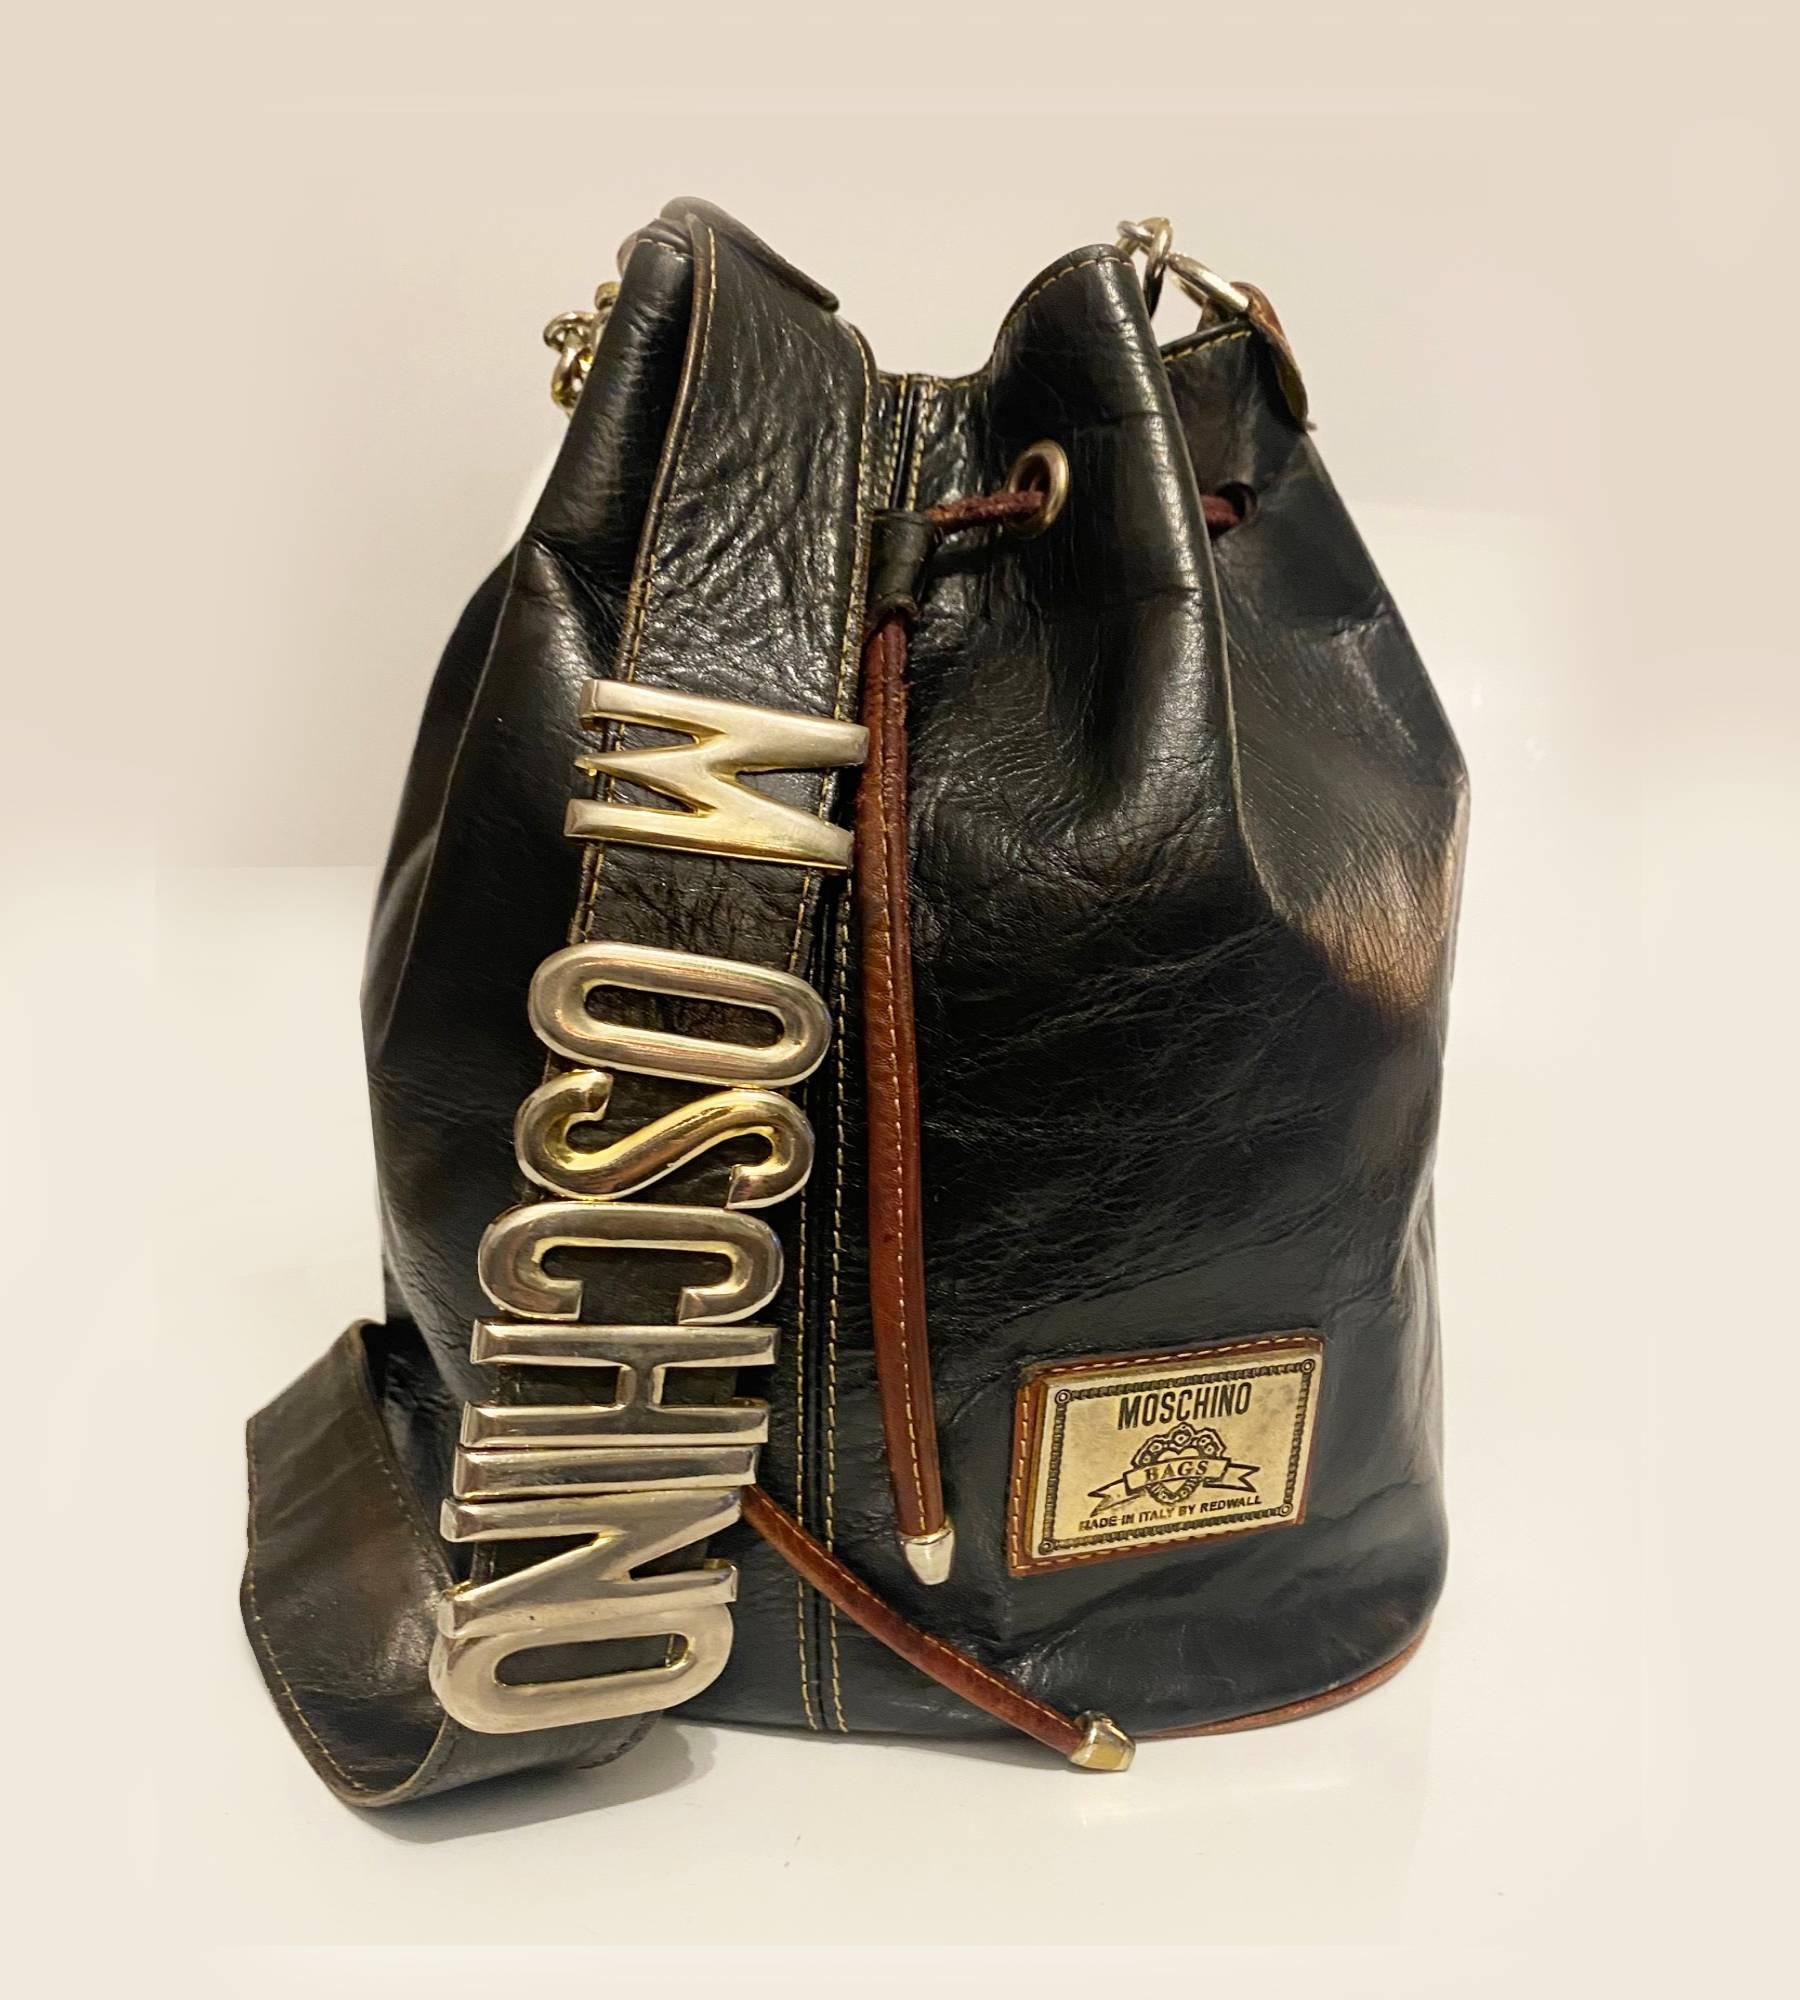 MOSCHINO Vintage Bucket bag in Black Brown leather, gold tome metal lettering that slides along the strap, inside zipped pocket.


This vintage leather bag is stylish and a practical way to add some signature Moschino flair to your wardrobe. It's a